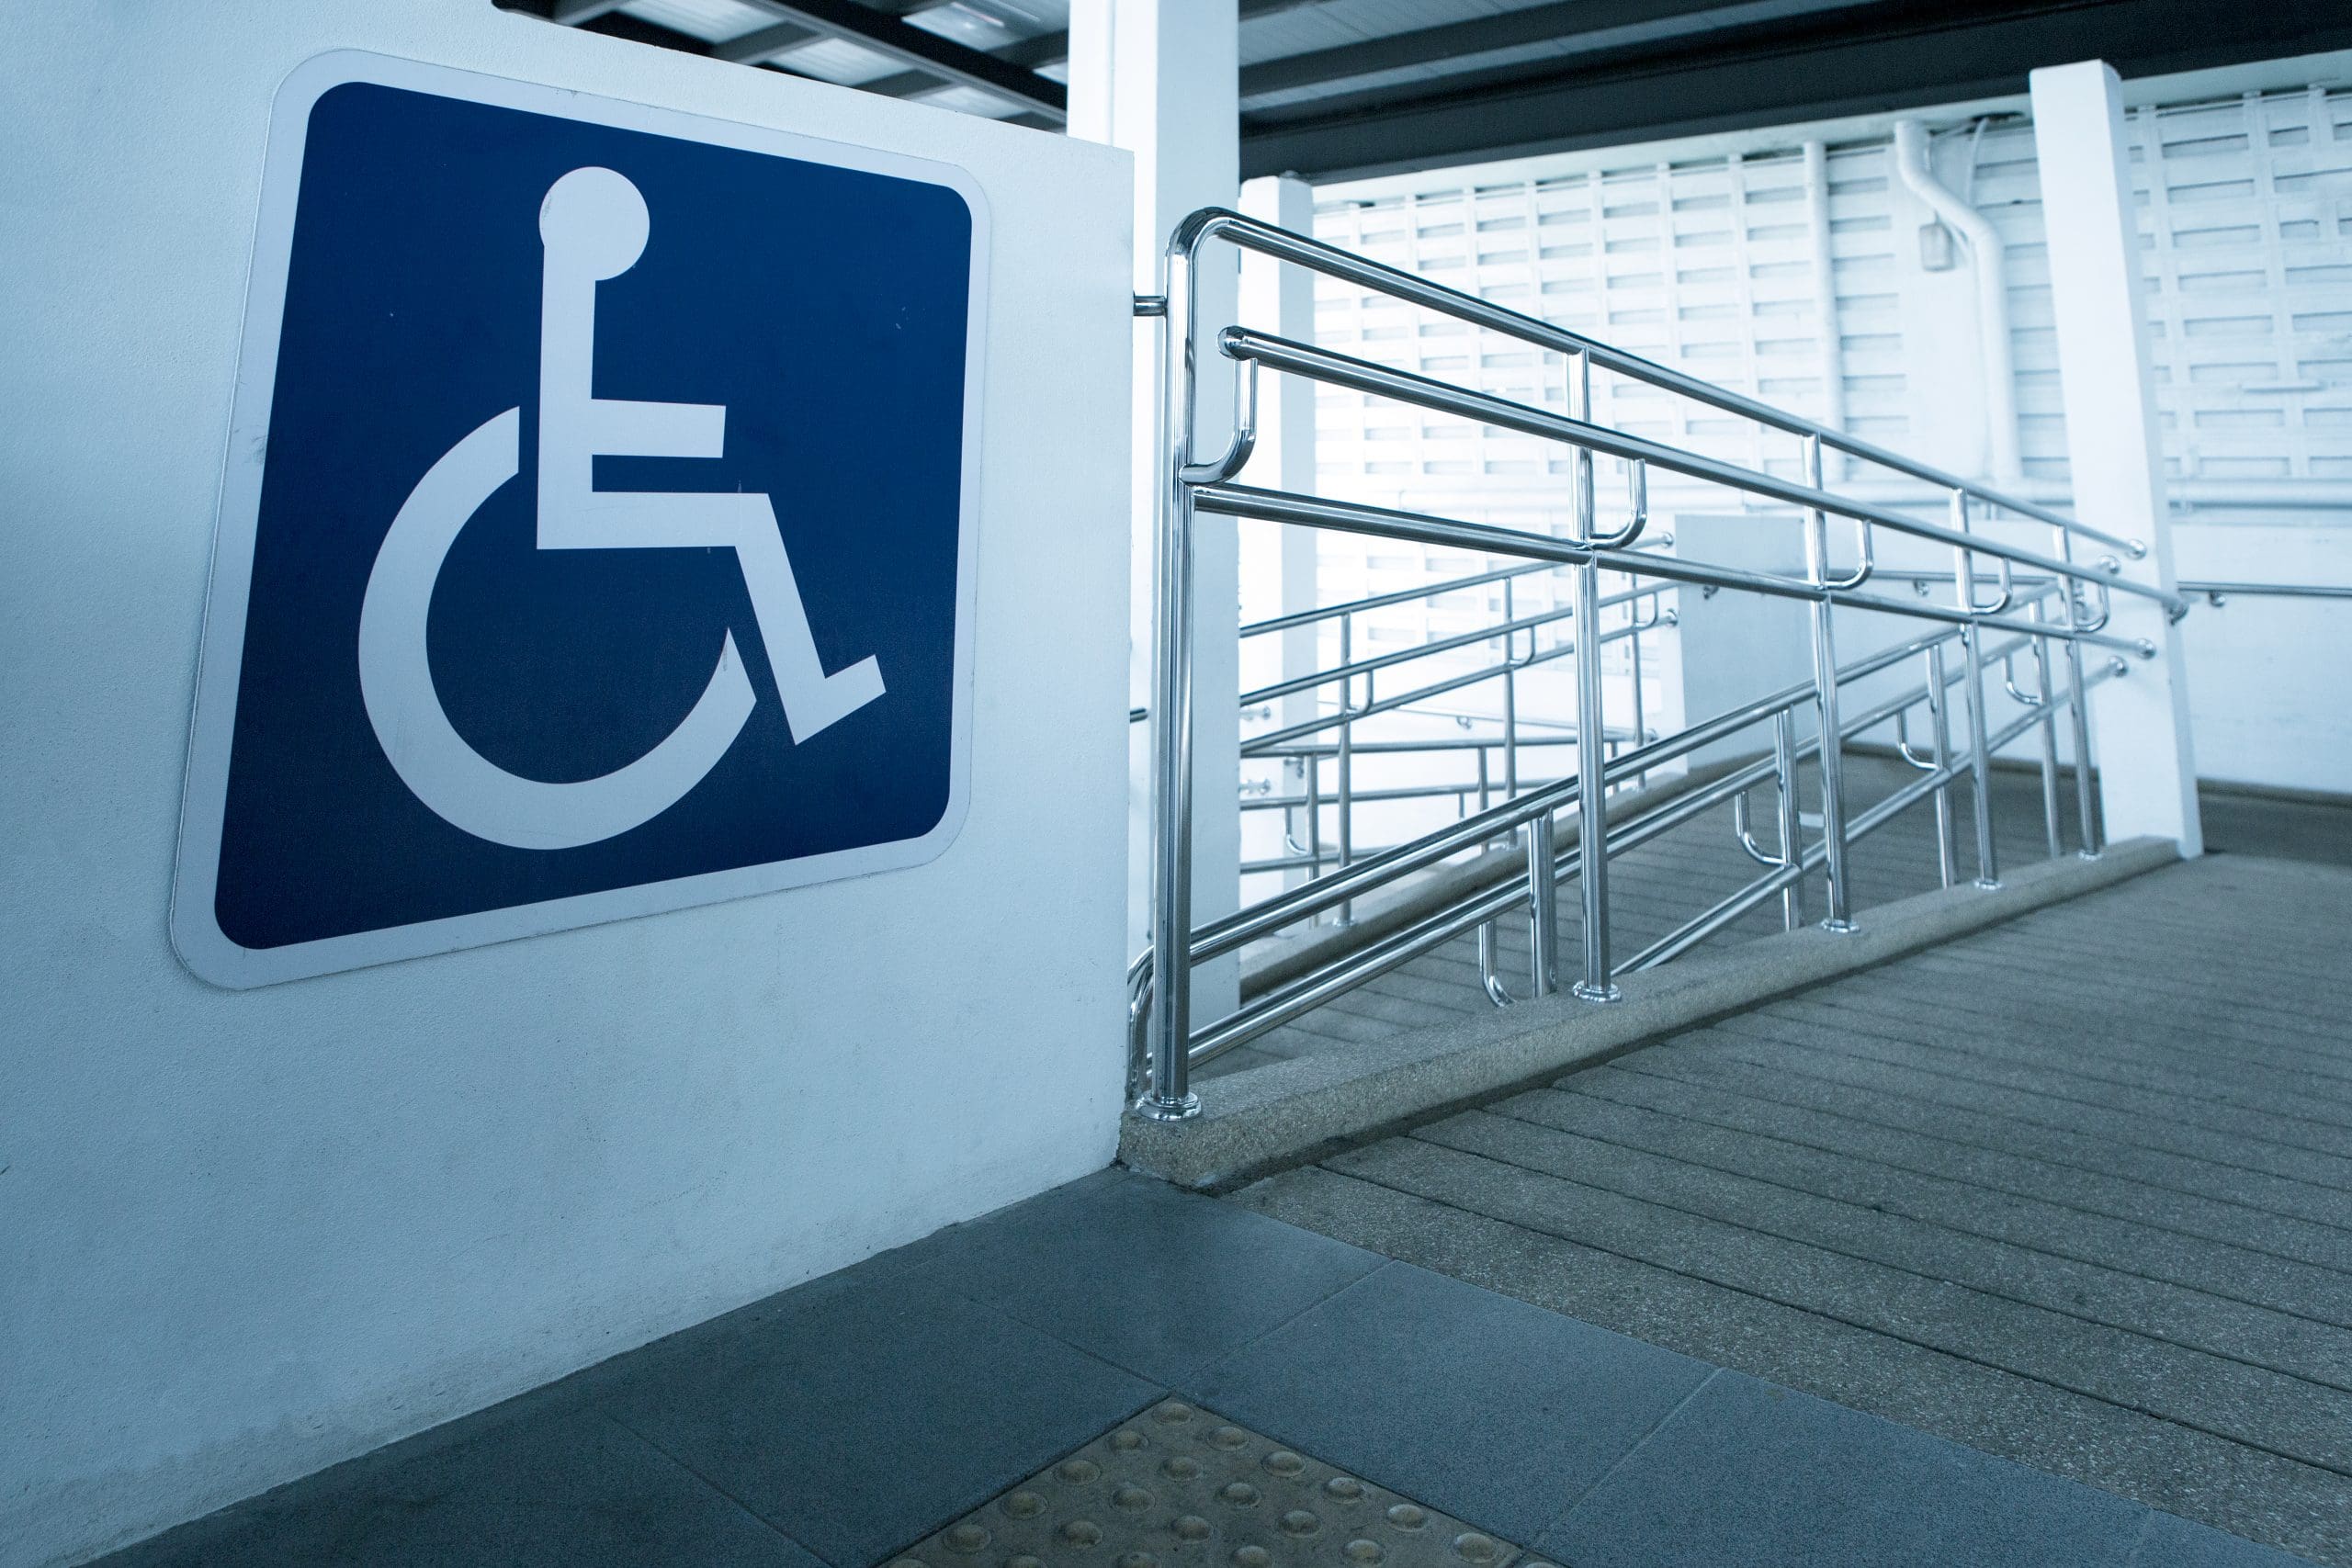 A wheelchair accessible sign indicates ramp access